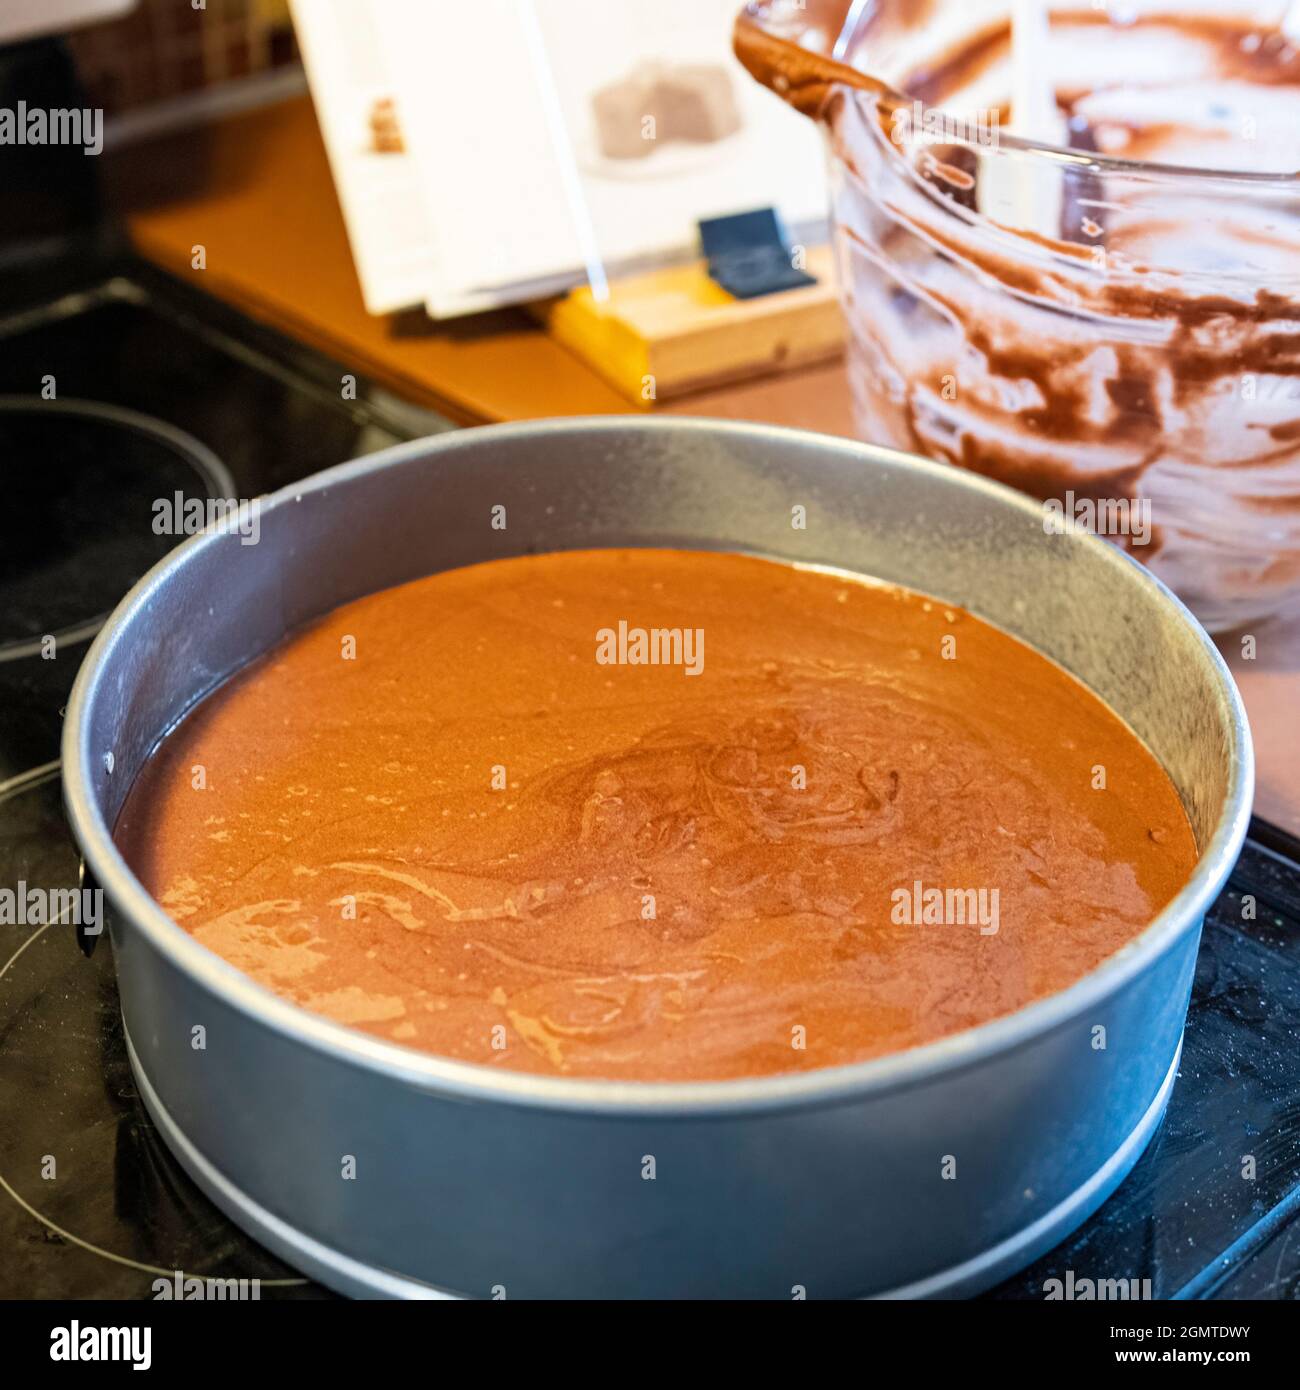 https://c8.alamy.com/comp/2GMTDWY/chocolate-cake-batter-in-a-metal-springform-pan-with-empty-glass-mixing-bowl-and-cookbook-in-background-out-of-focus-2GMTDWY.jpg